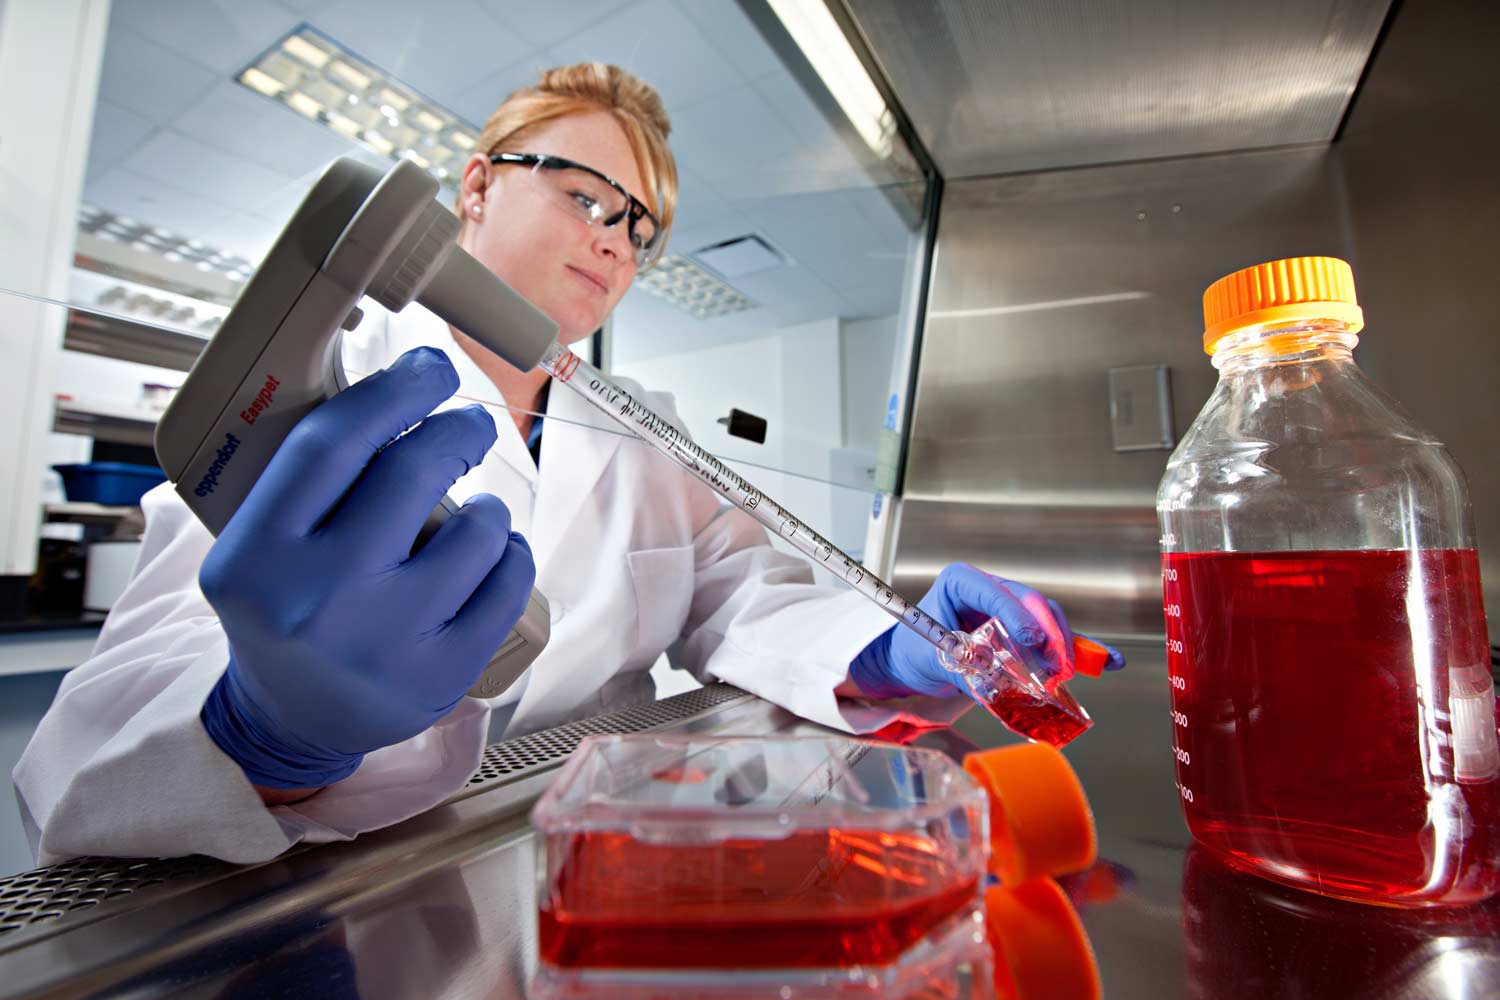 Researcher in a lab coat and protective eye glasses filling a syringe with a red liquid.